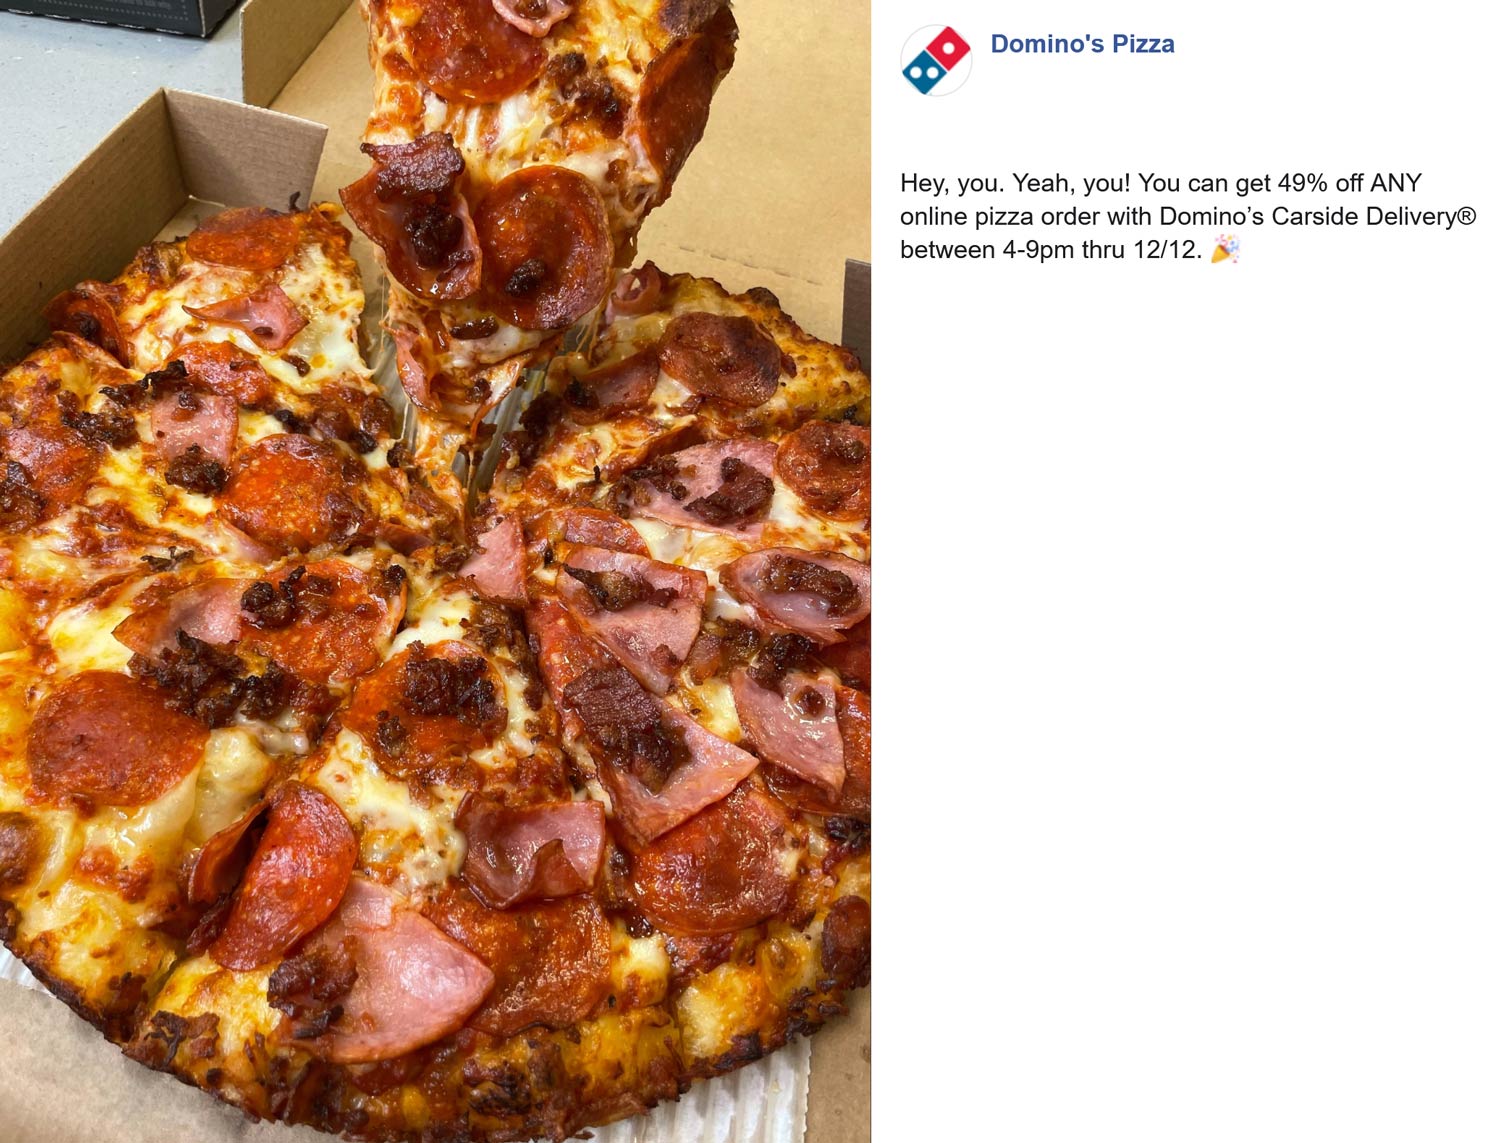 Dominos restaurants Coupon  49% off online pizza orders 4-9p at Dominos #dominos 